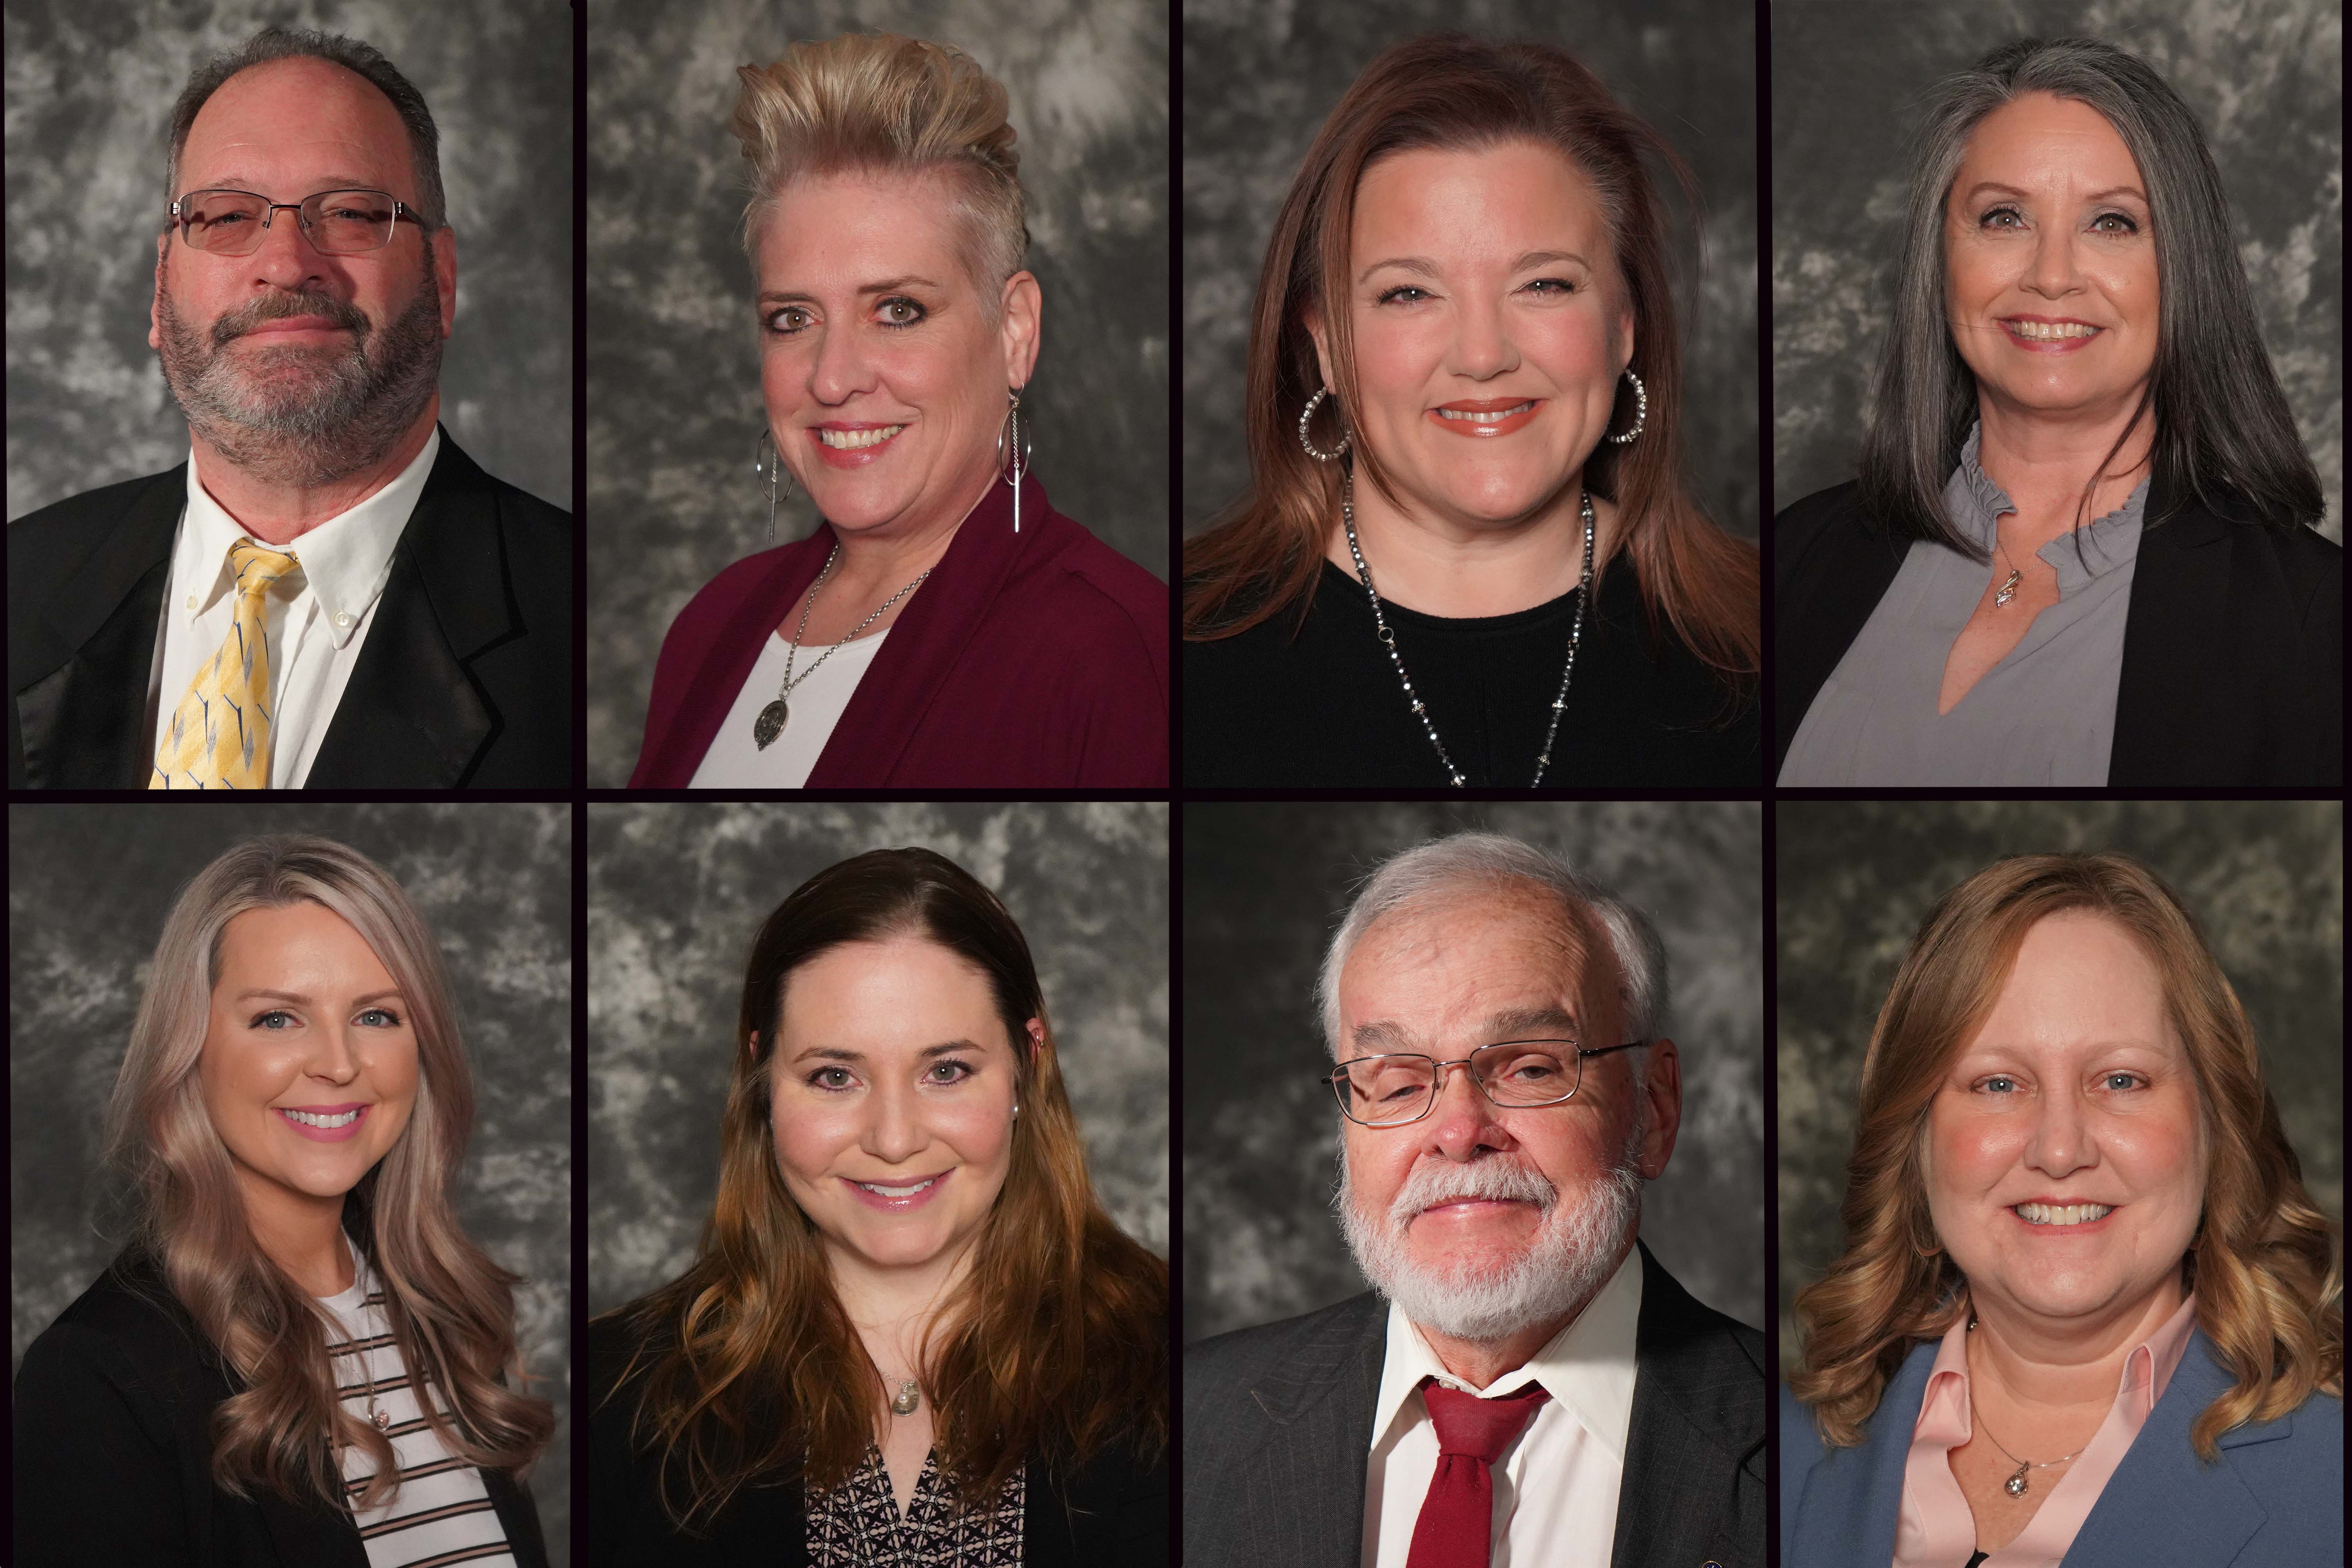 (From left to right, top to bottom) Robert Browder, program director and instructor of Commercial Truck Driving; Jennifer Carter, instructor of Psychology; Jennifer Dixon, assistant dean and instructor of Early Childhood Education; Julia Hopkins, instructor of Computer Information Systems Technology; Deanna Hulsey, instructor of Cosmetology; Kimberly Temple, clinical coordinator and instructor of Respiratory Care; Dwight Watt, instructor of Computer Information Systems Technology; and Deseri Wooten, coordinator and instructor of Nursing Simulation Lab, have been nominated for GNTC’s 2024 Rick Perkins Award.